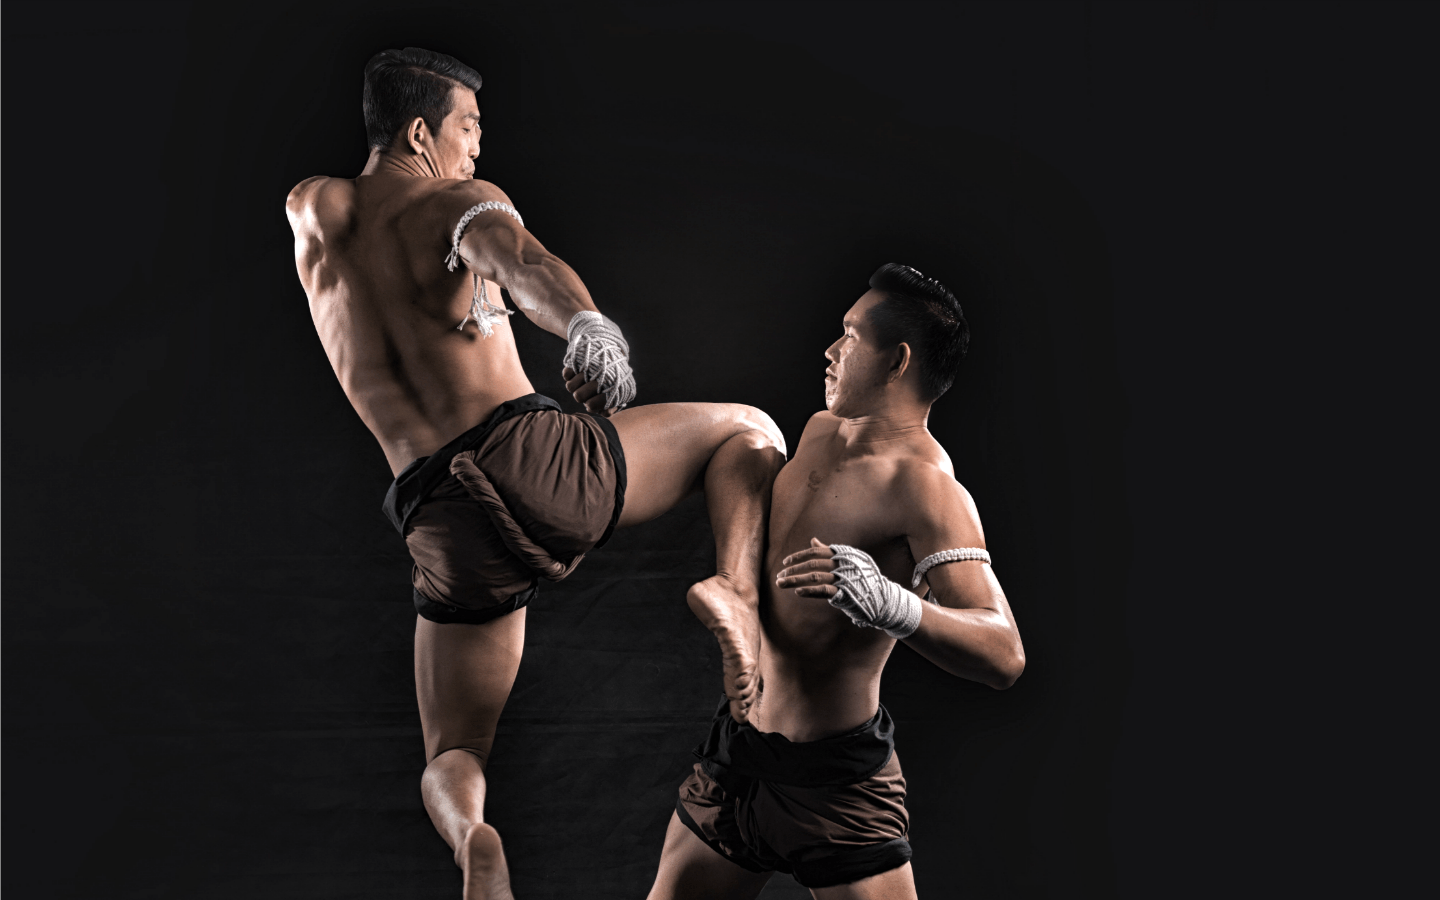 Top fighters to bring the art of Muay Thai to Qatar this month.